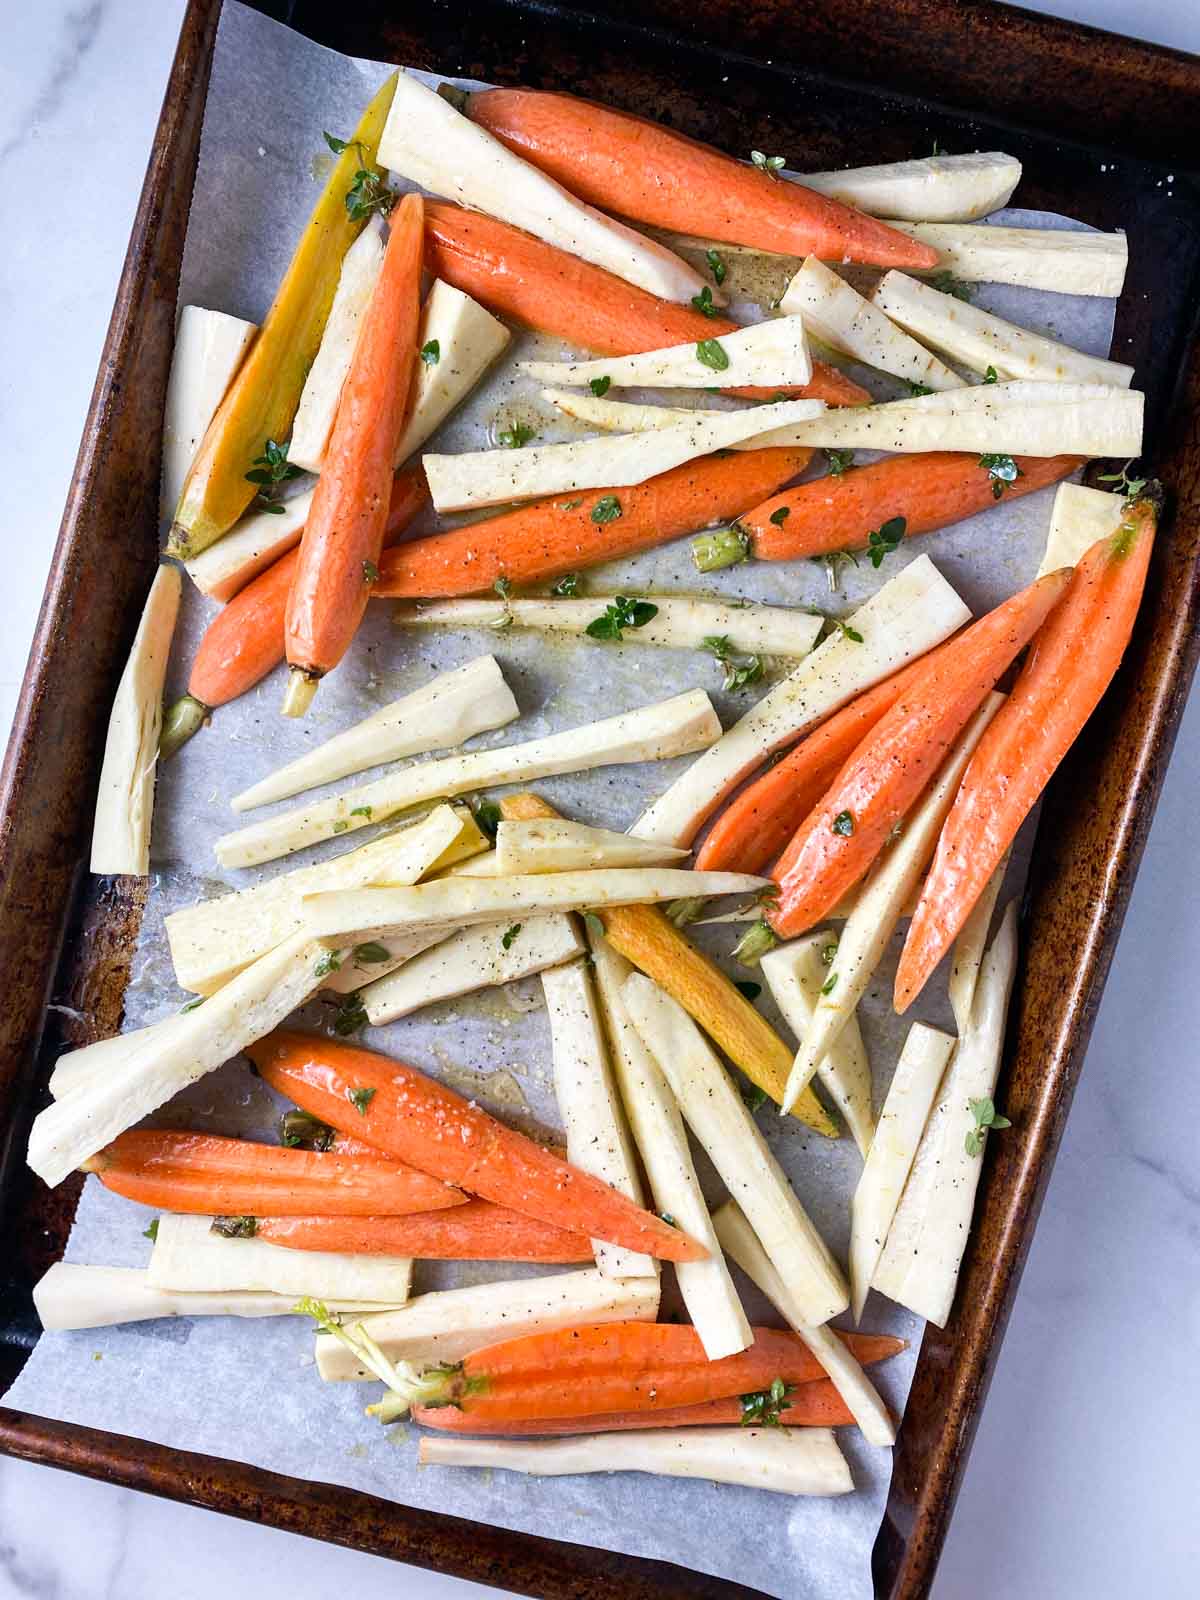 Cut carrots and parsnips on a roasting pan.